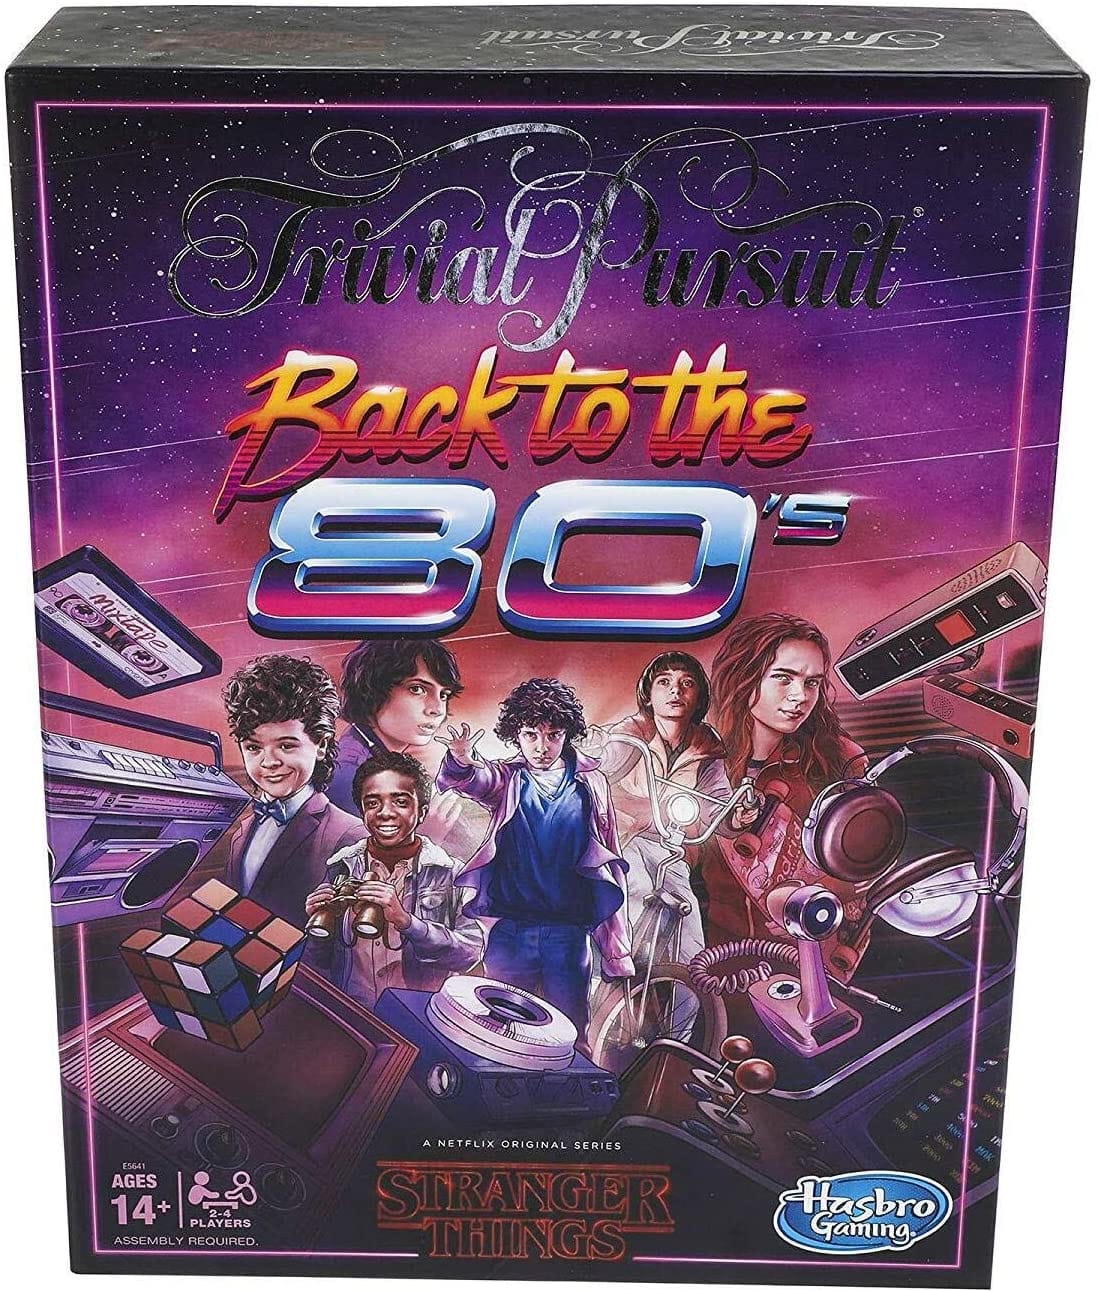 Check out Hasbro's Trivial Pursuit Netflix's Stranger Things Back to The ‘80s Edition on Amazon.